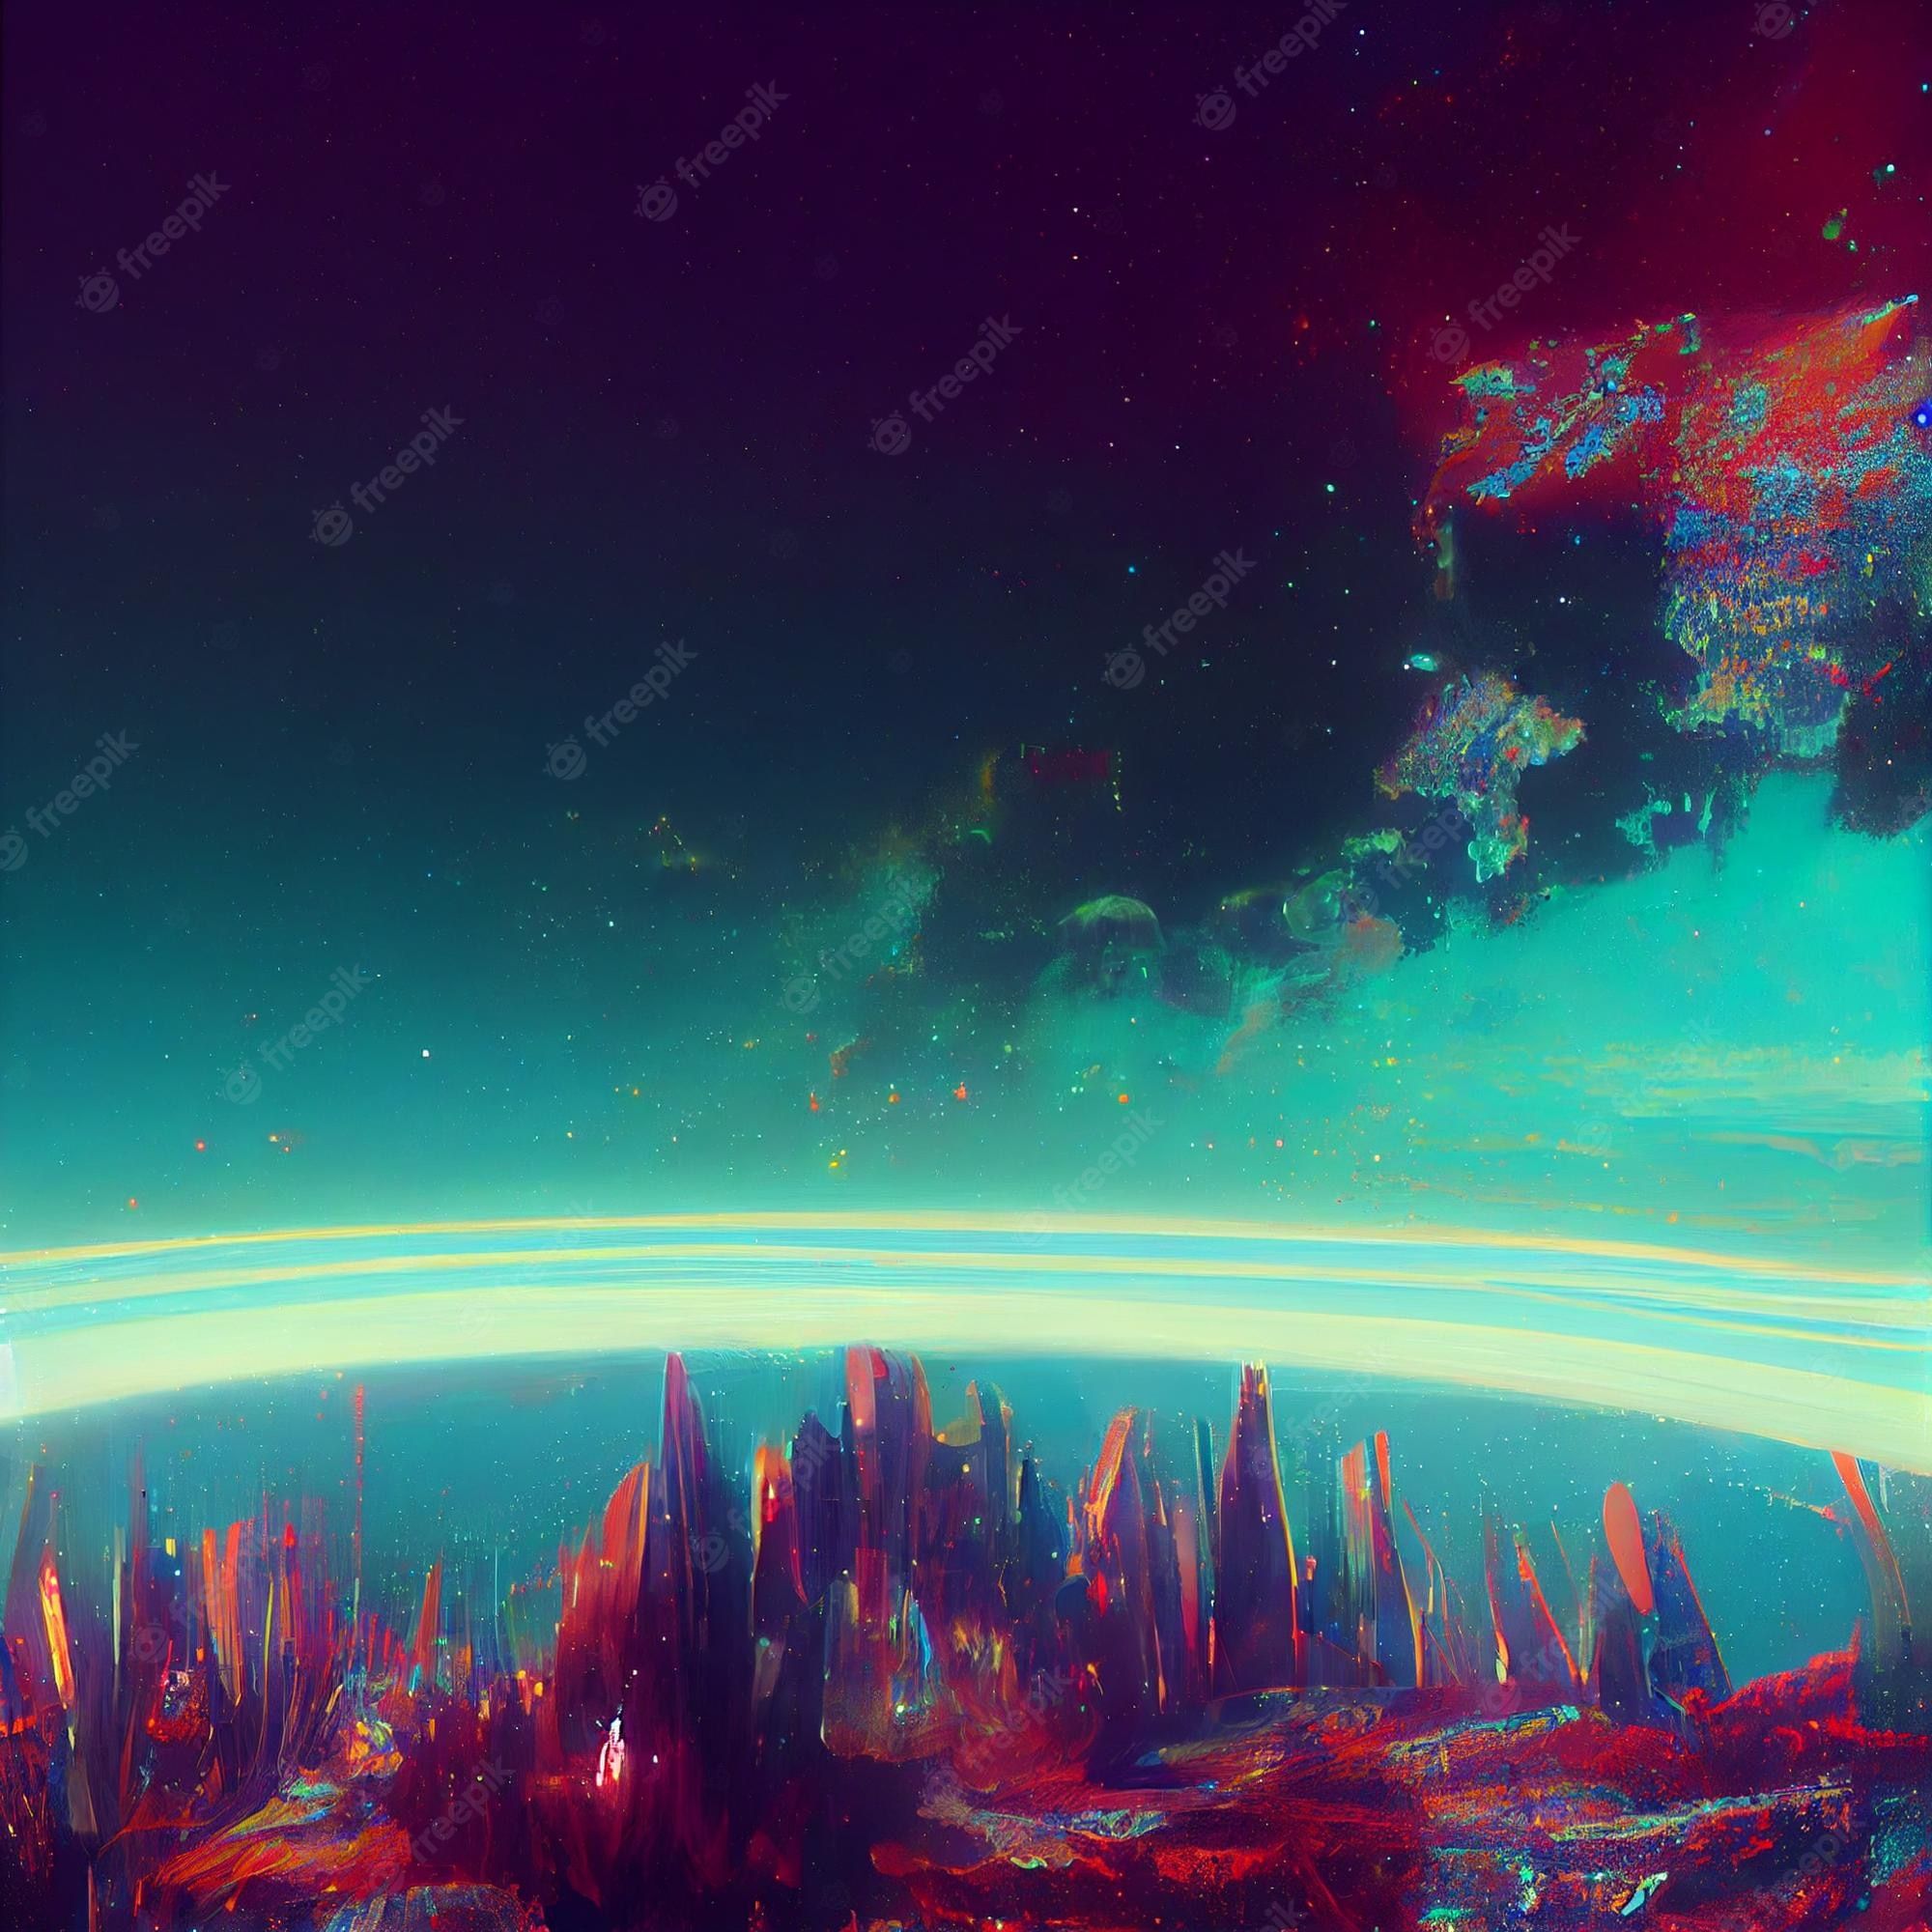 Premium Photo. Glitch background universe abstract glitchy space video wallpaper 4k